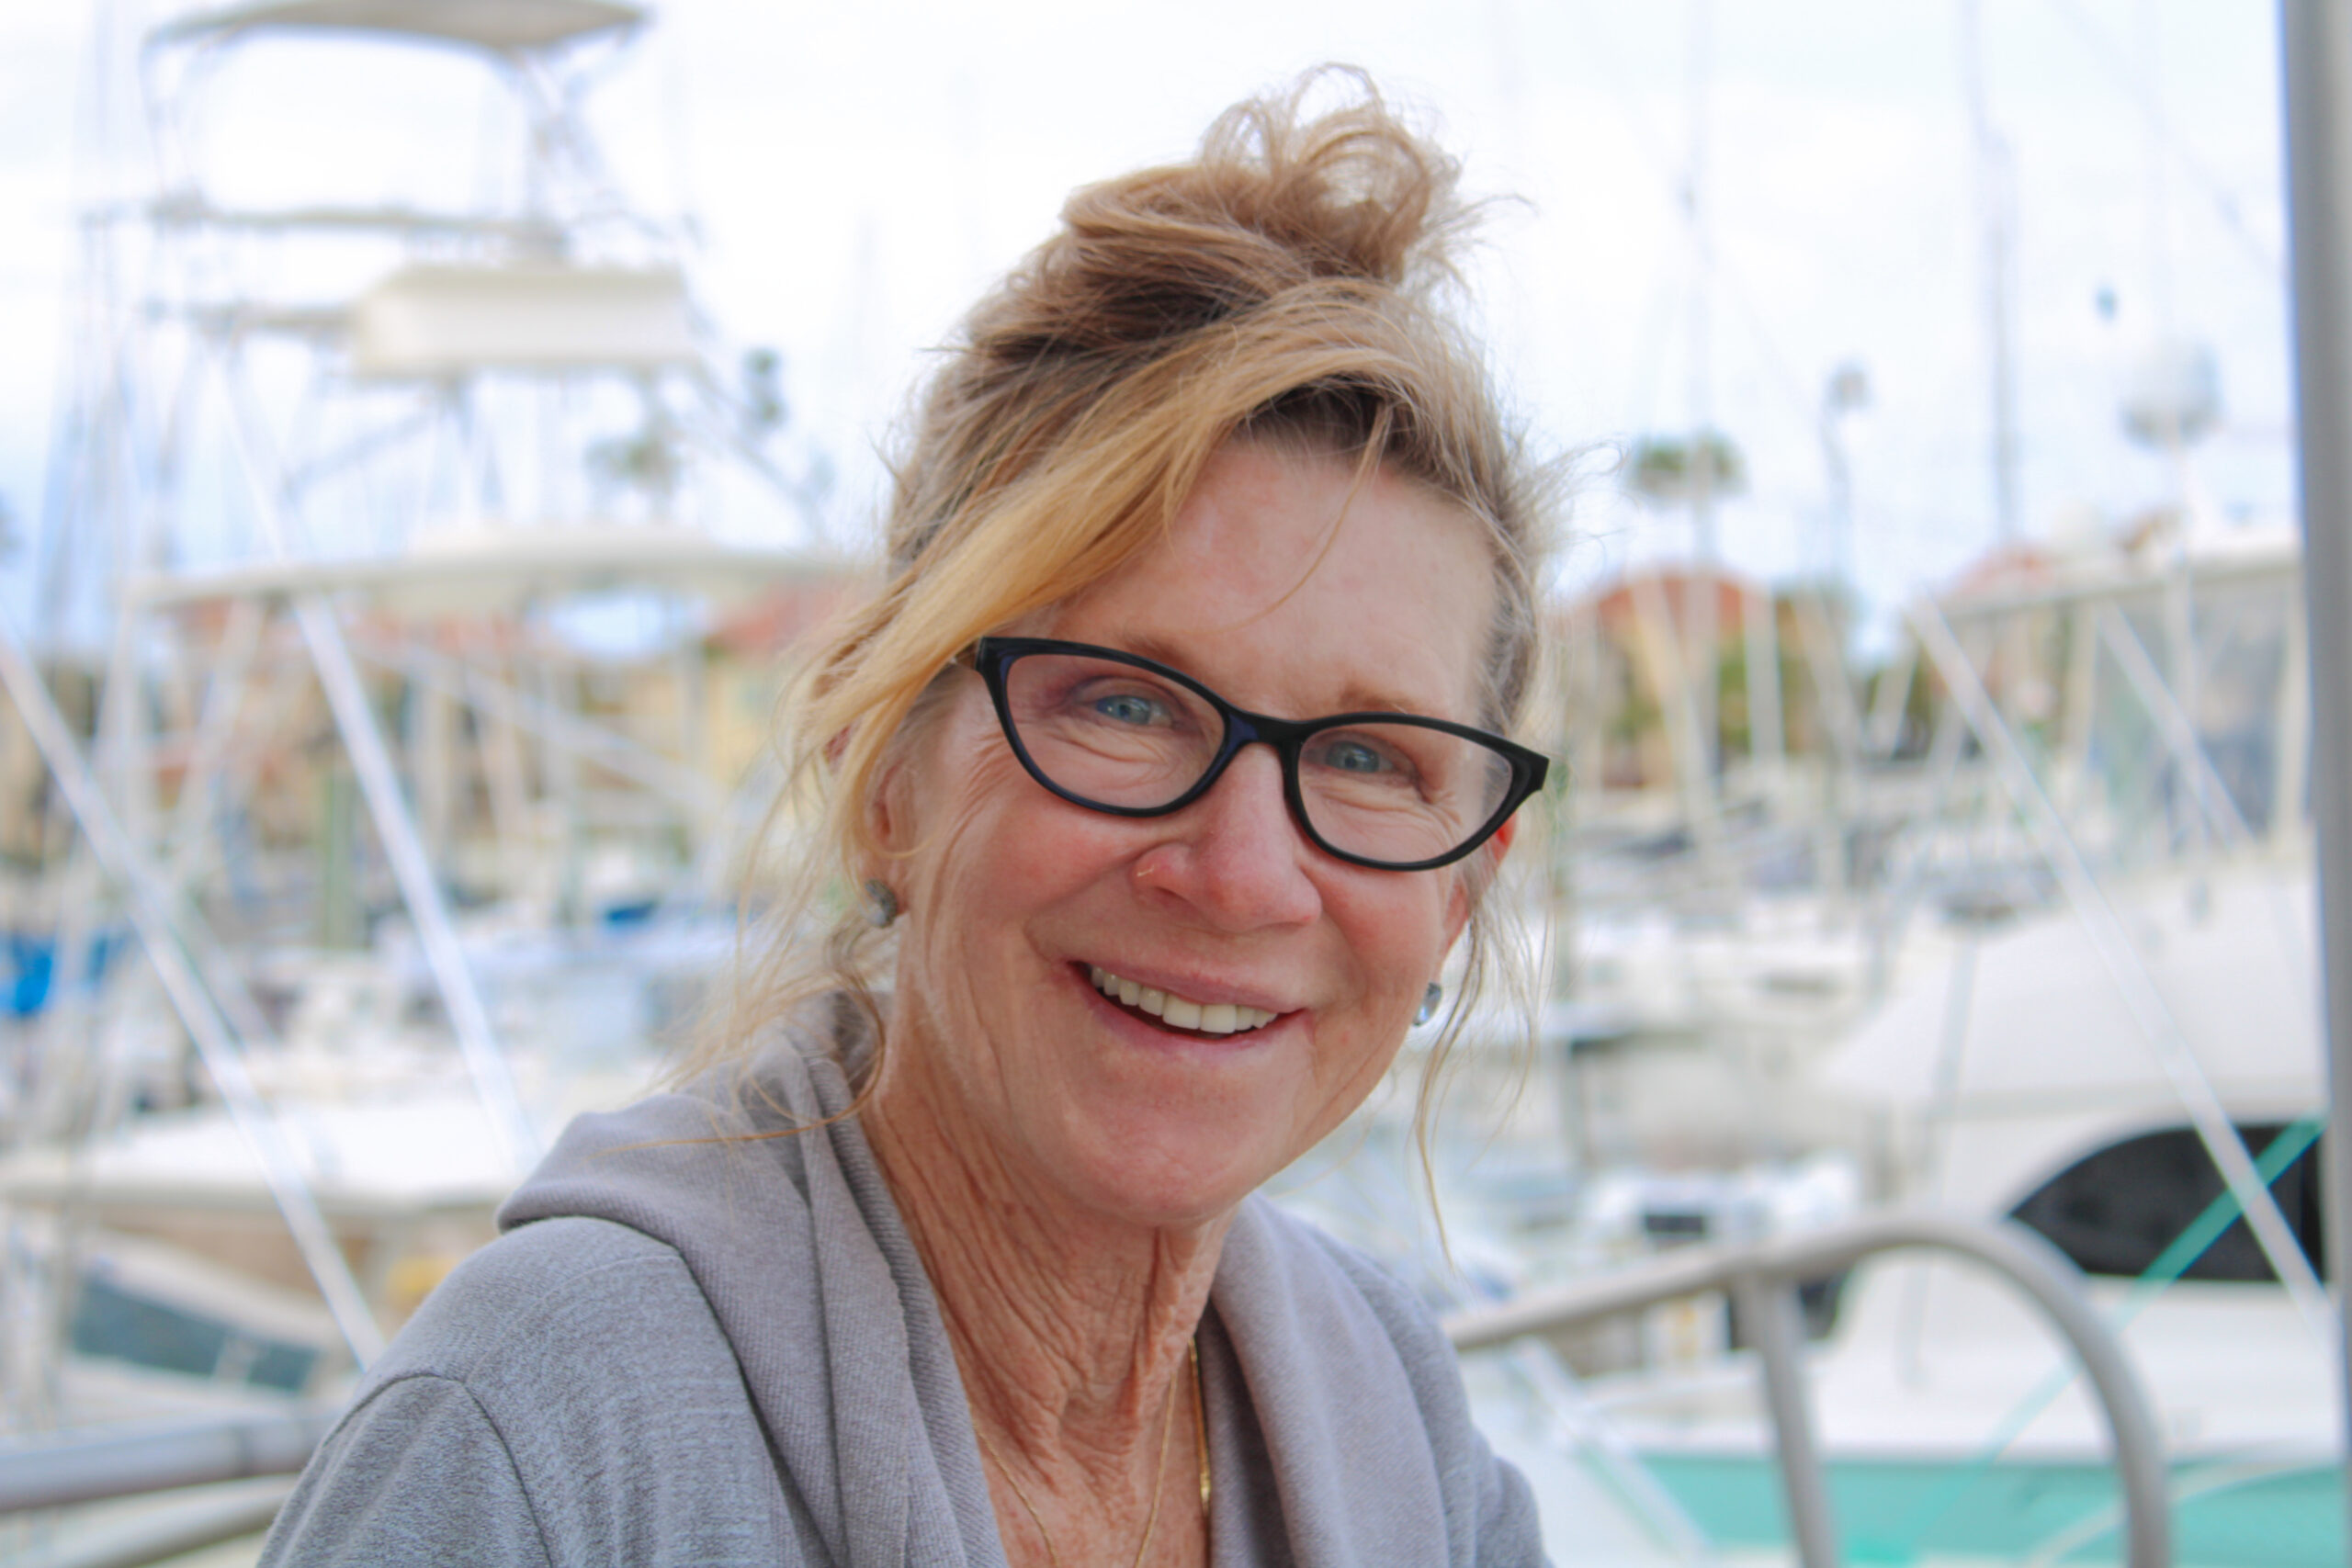 St Augustine Sailing - Sailing Workshops - Continuing Education - Learn Something New - Learn the Ropes - Women on the Water - Empowering Women in St Augustine - Women Sailors - Marina life - Things to do for women in St Augustine - Sailing Seminar